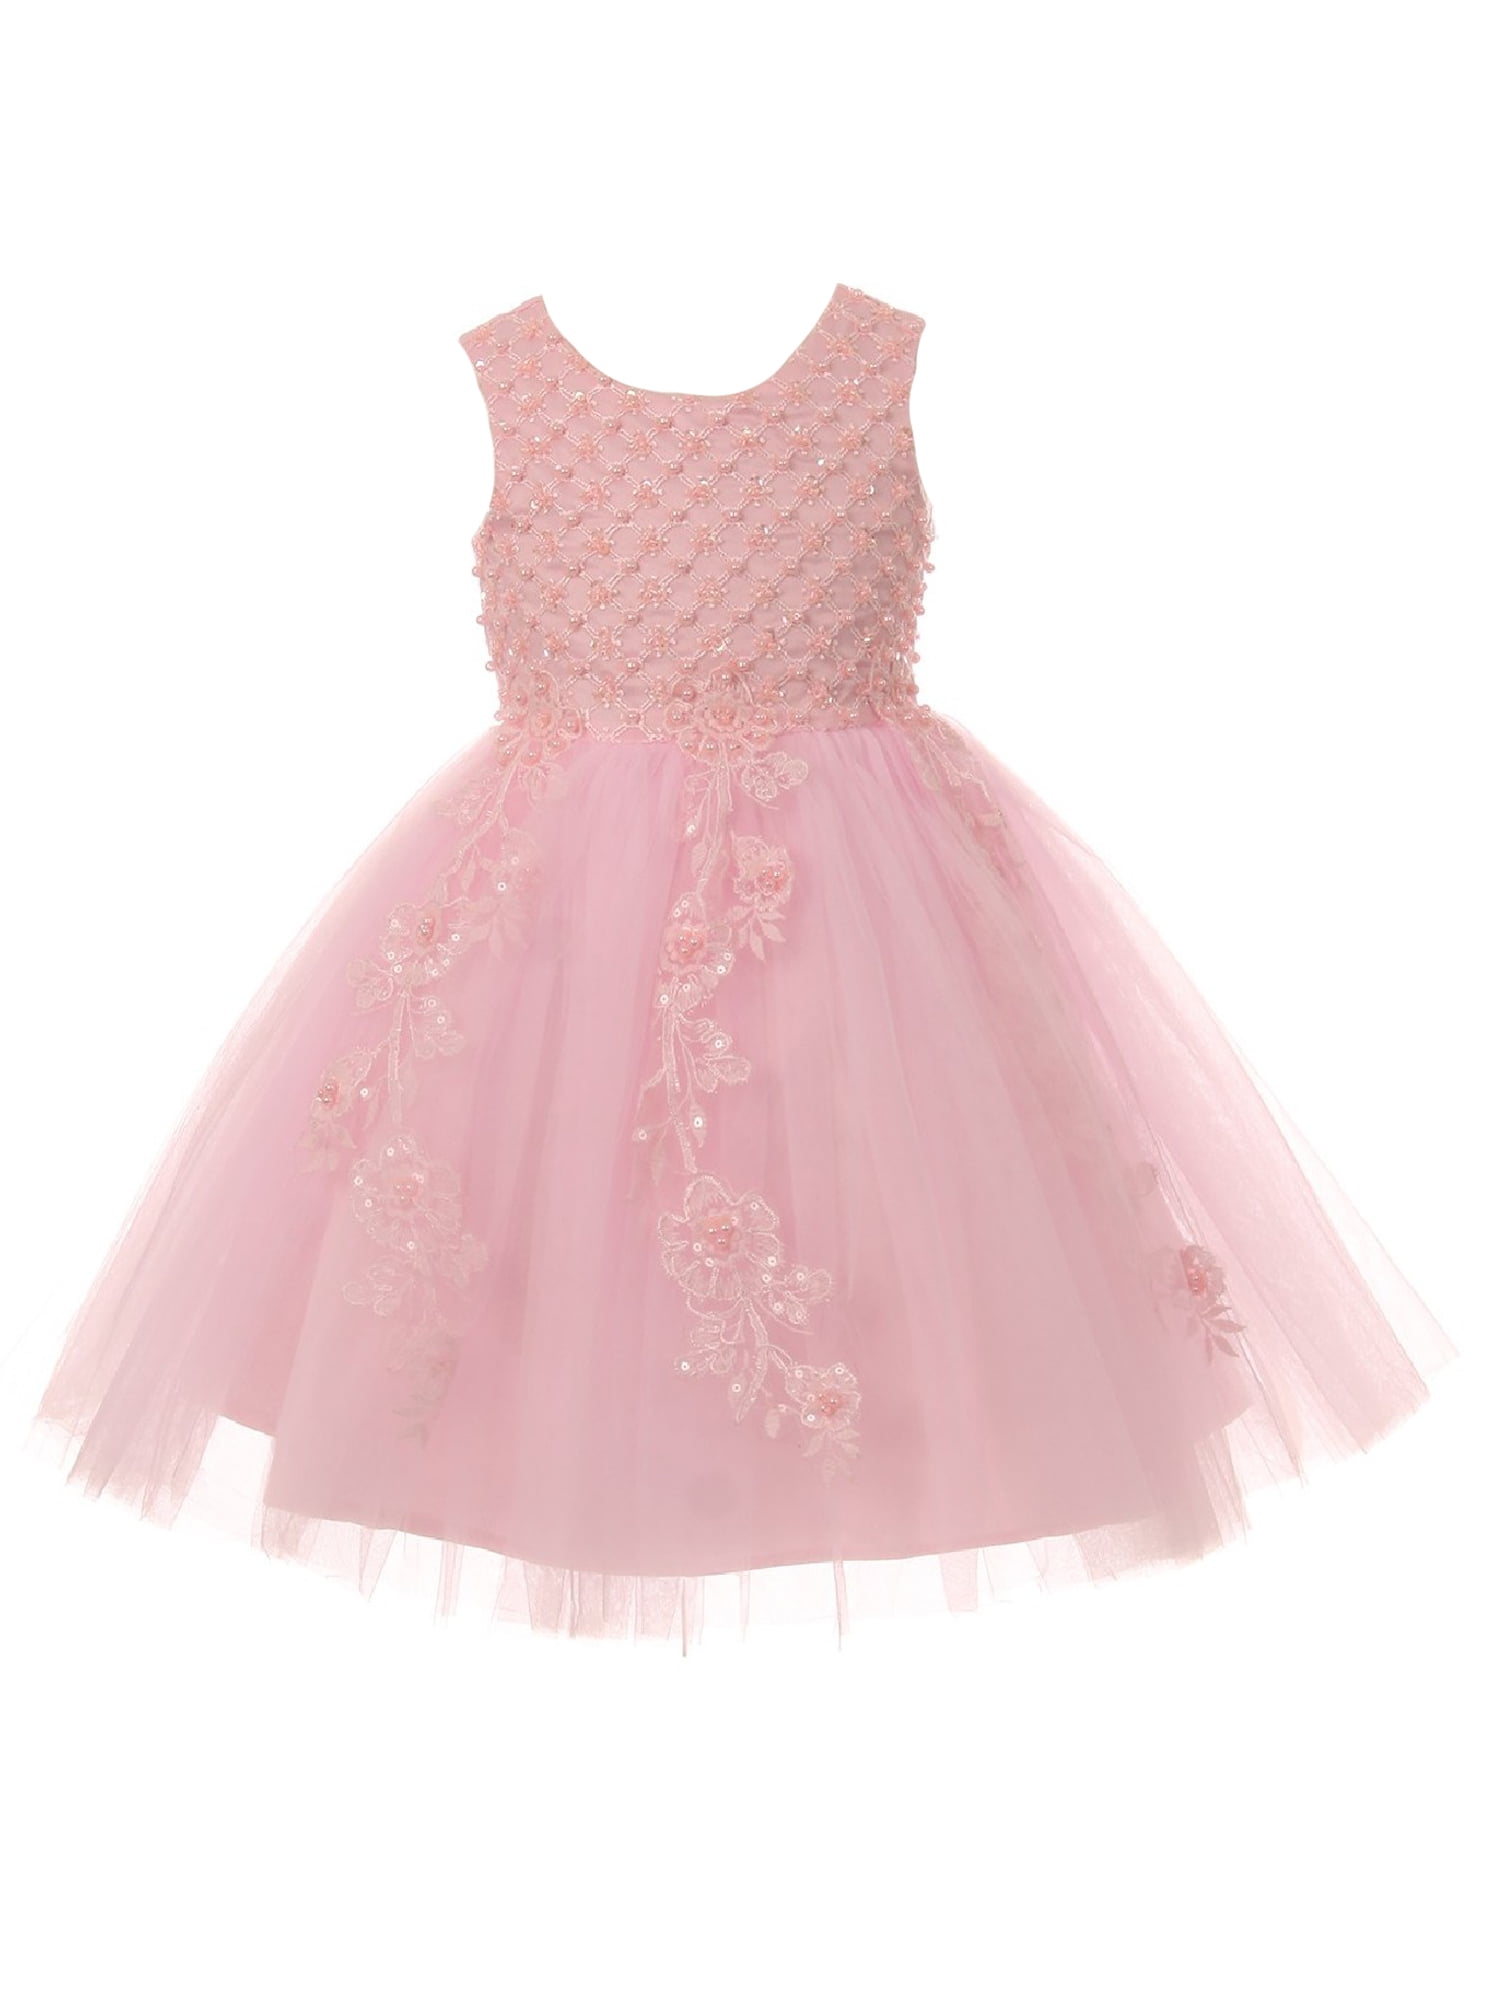 Cinderella Couture Little Girls Pink Pearl Lace Tulle Flower Girl Dress ...